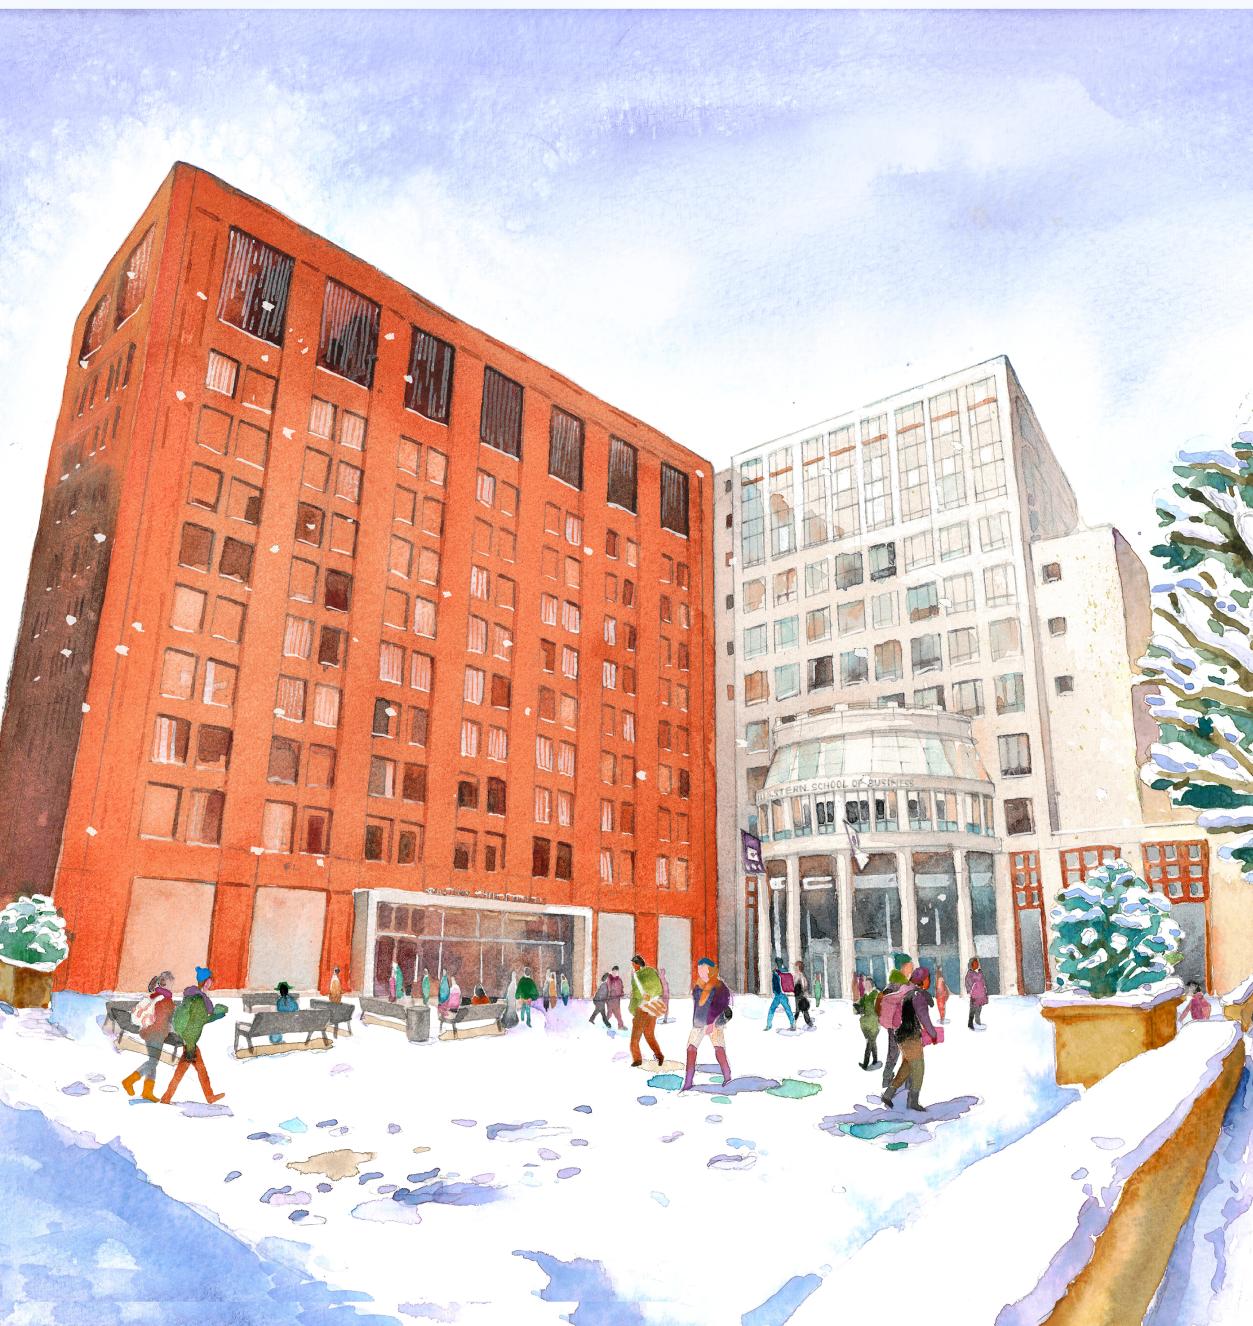 An illustration of a wintery scene at Gould Plaza